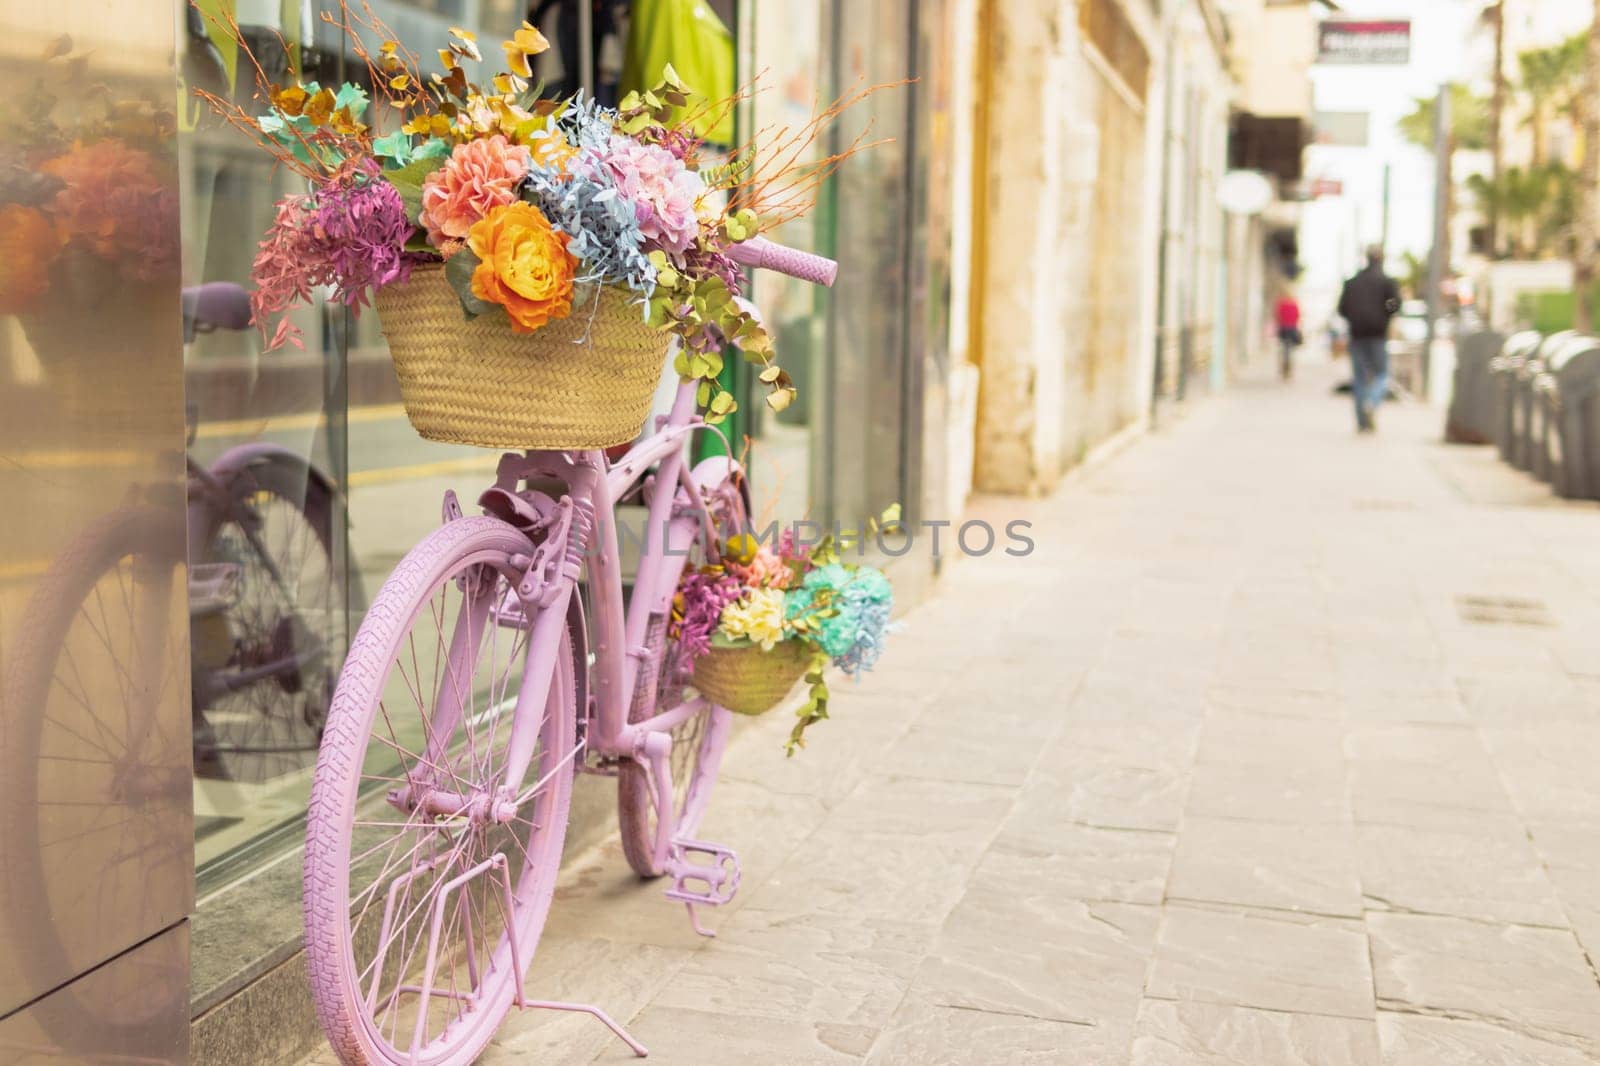 retor bicycle of pink color stands near the shop window decorated with flowers by PopOff